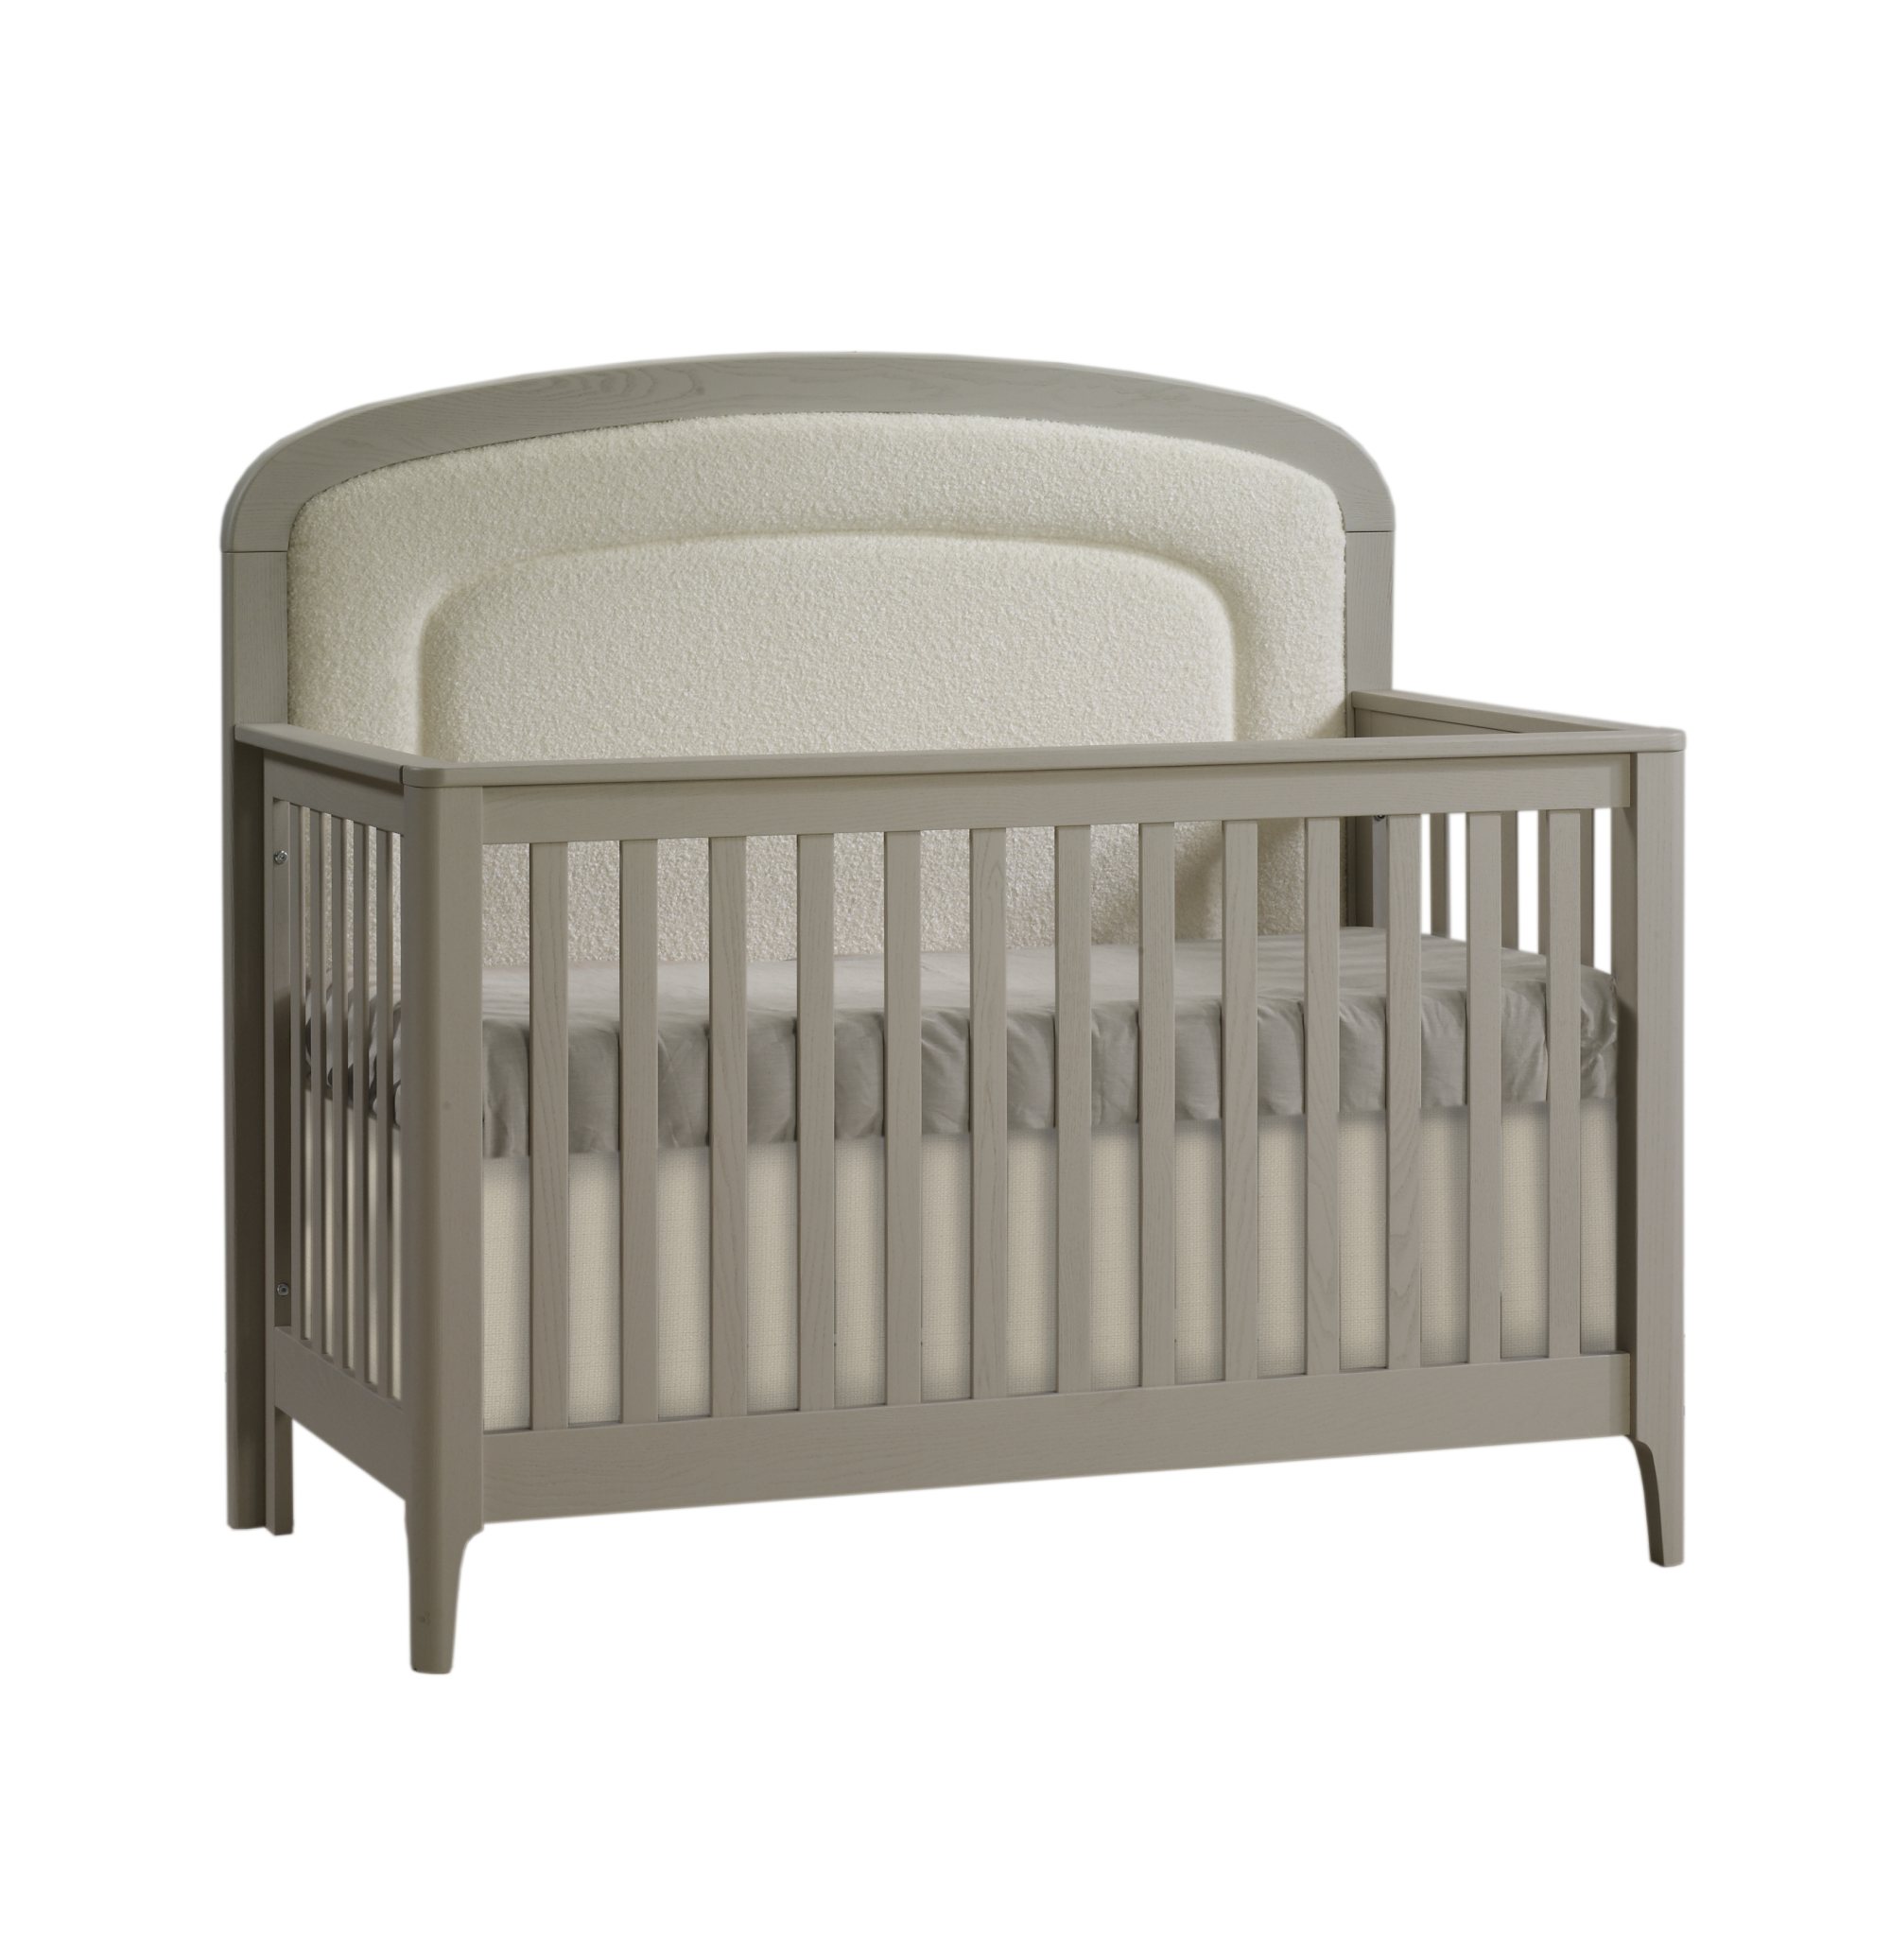 Palo “5-in-1” Convertible Crib with Bouclé Beige Upholstered headboard panel in Dove